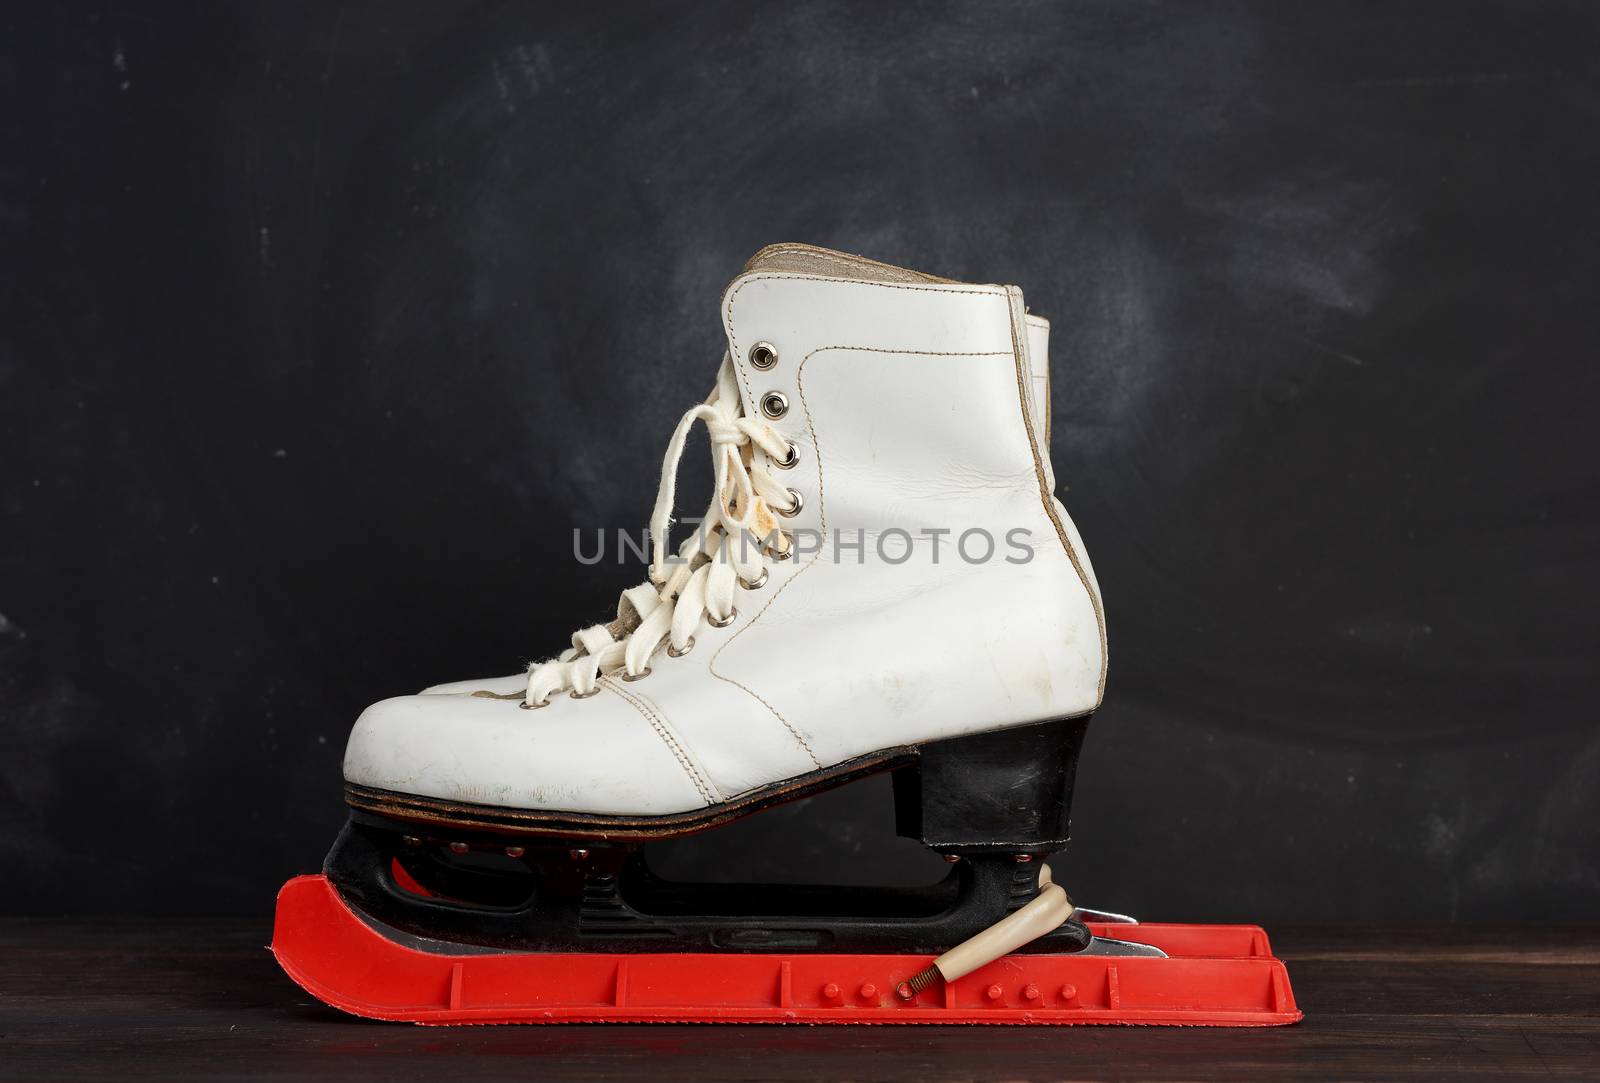 white leather skates for figure skating stand on a brown wooden background, sports equipment